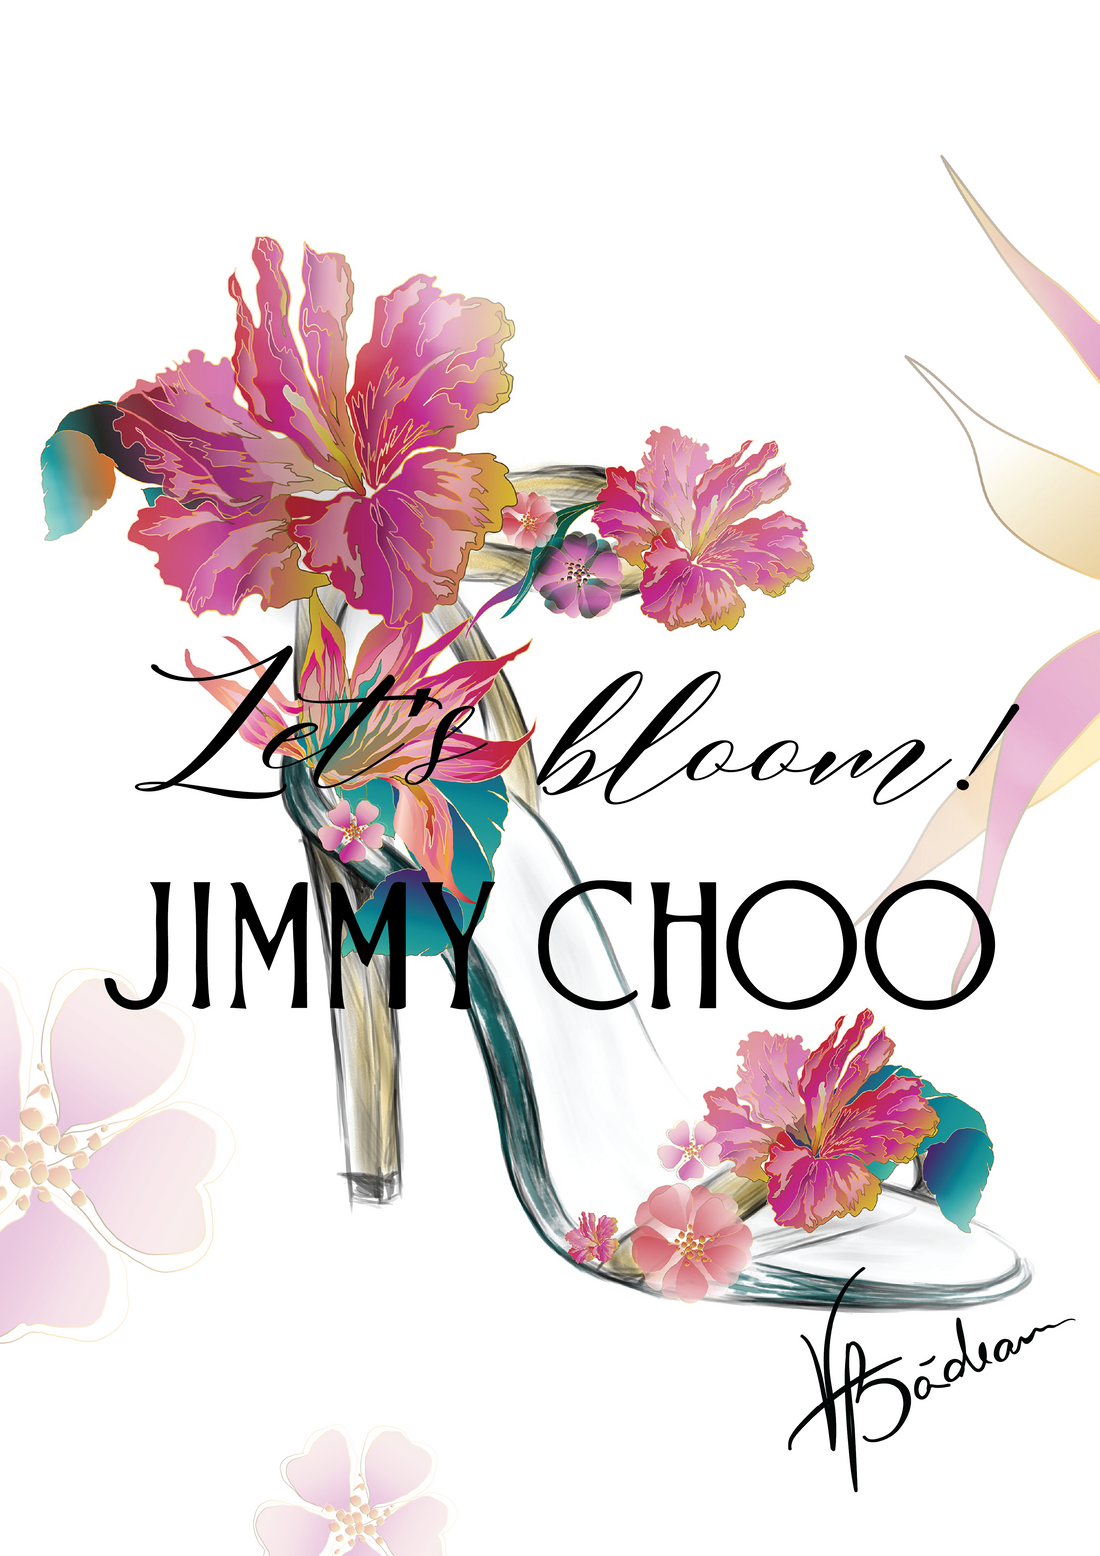 BLOSSOM IN YOUR CHOOS - Jimmy Choo